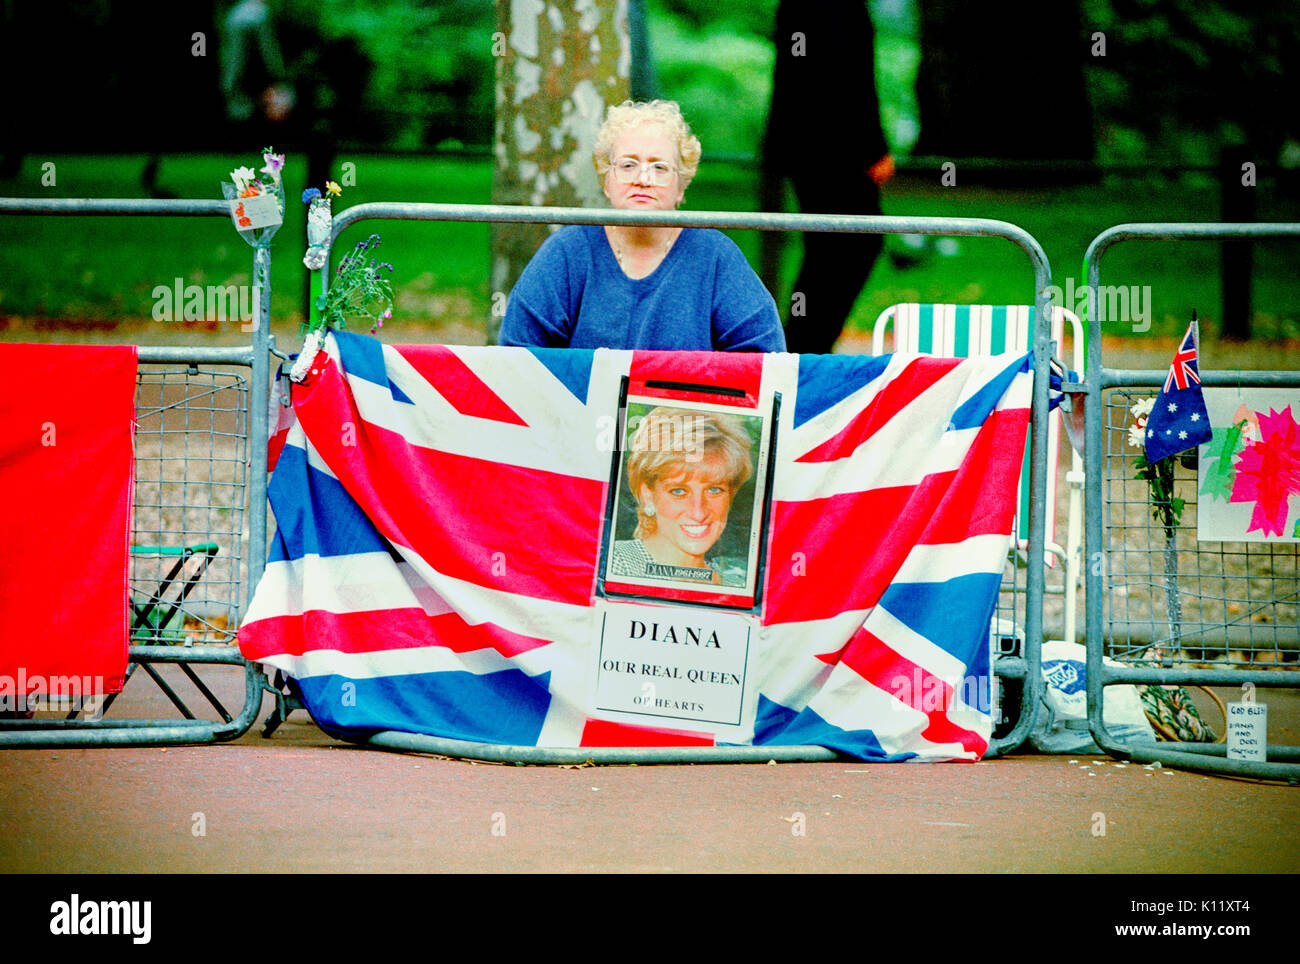 London, UK, 5th September, 1997. Funeral of Diana, Princess of Wales.  A woman is pictured waiting on the funeral procession route on the day before the funeral of Princess Diana, many people arrived early in order to make sure of a good spot from which to view the funeral procession. Stock Photo